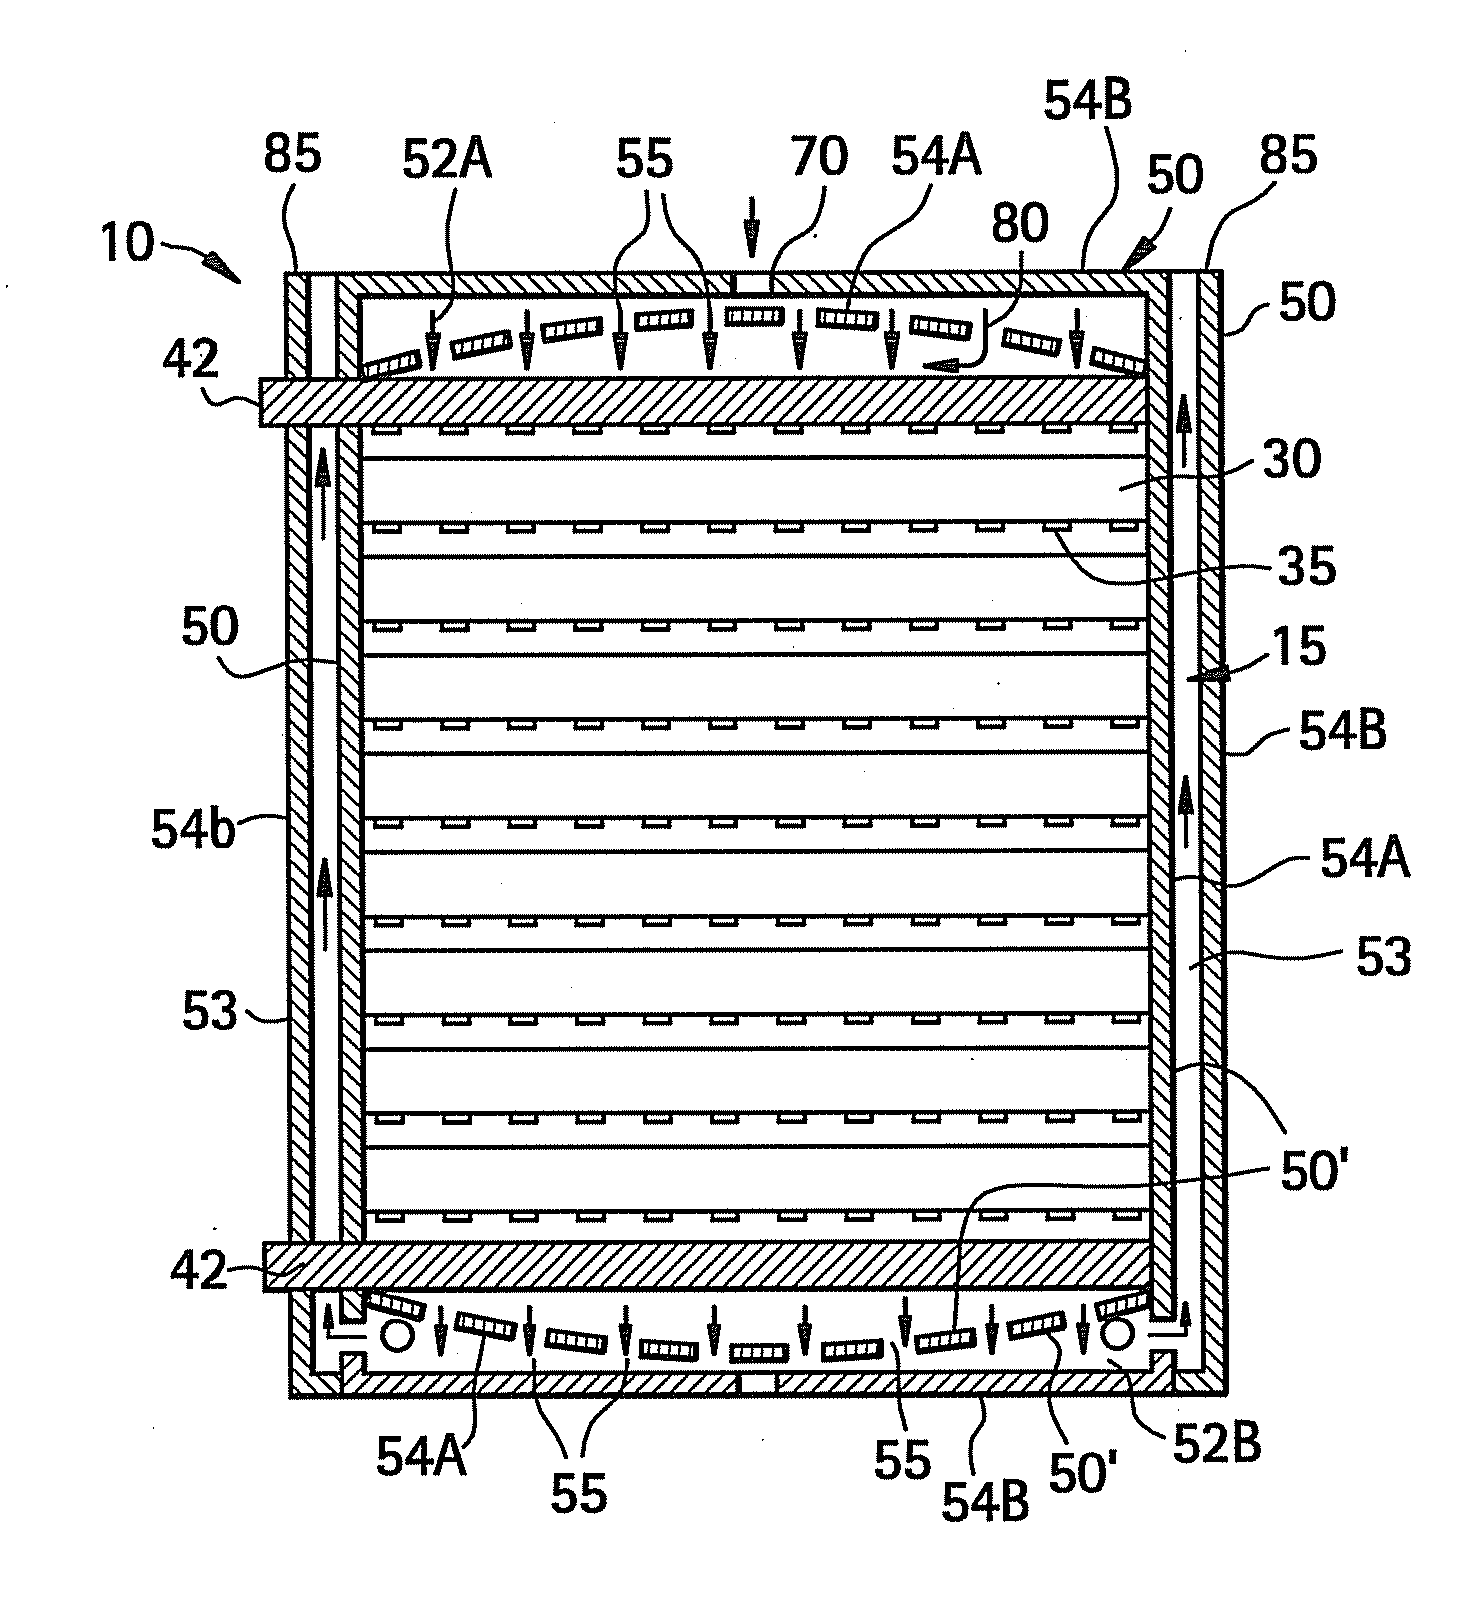 Low mass solid oxide fuel device array monolith